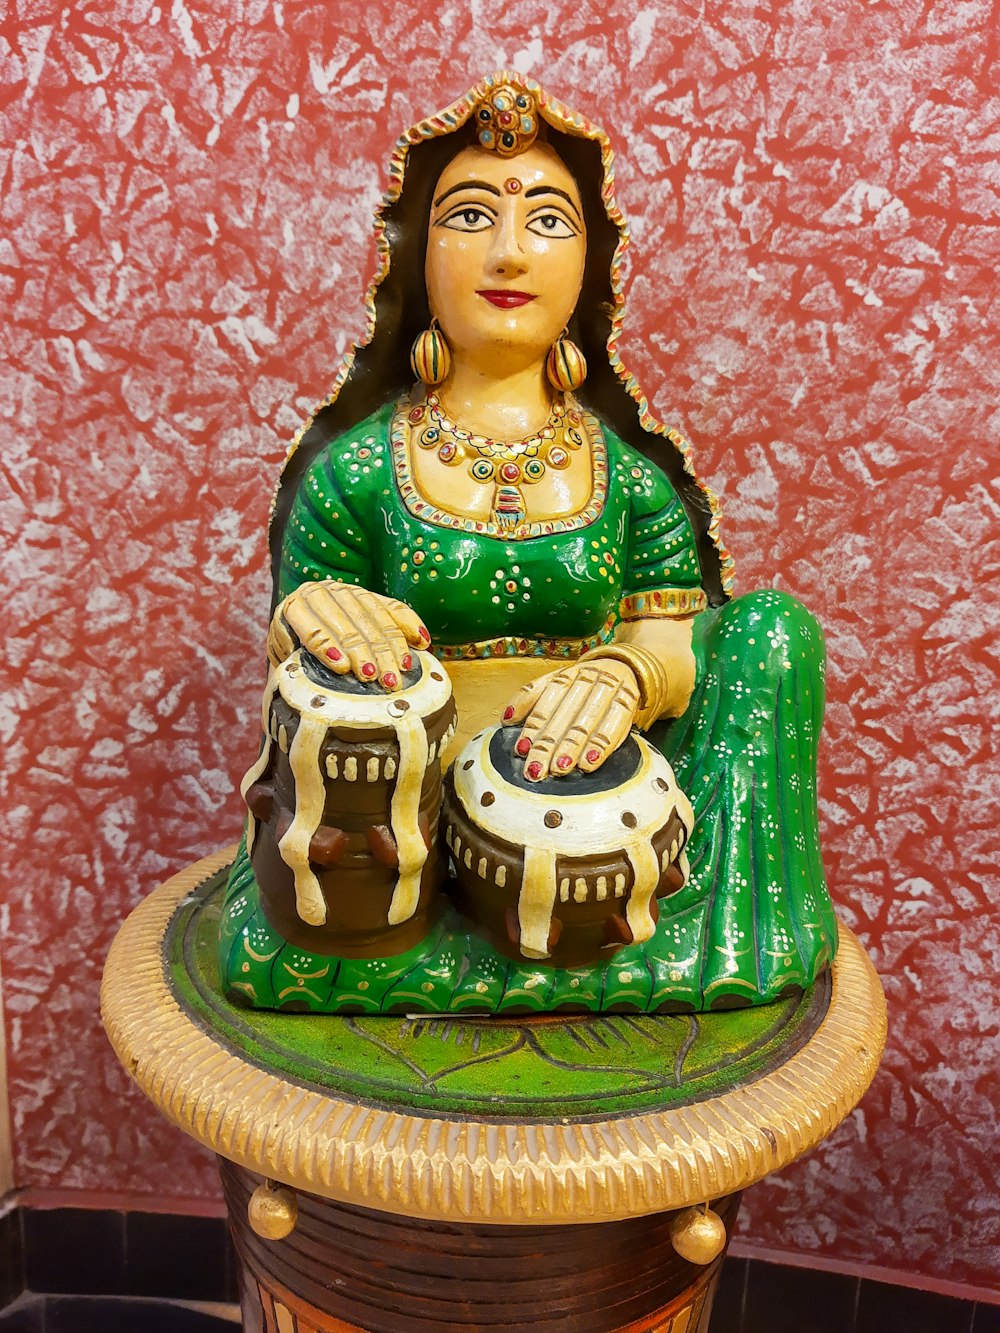 a statue of a woman sitting on top of a table